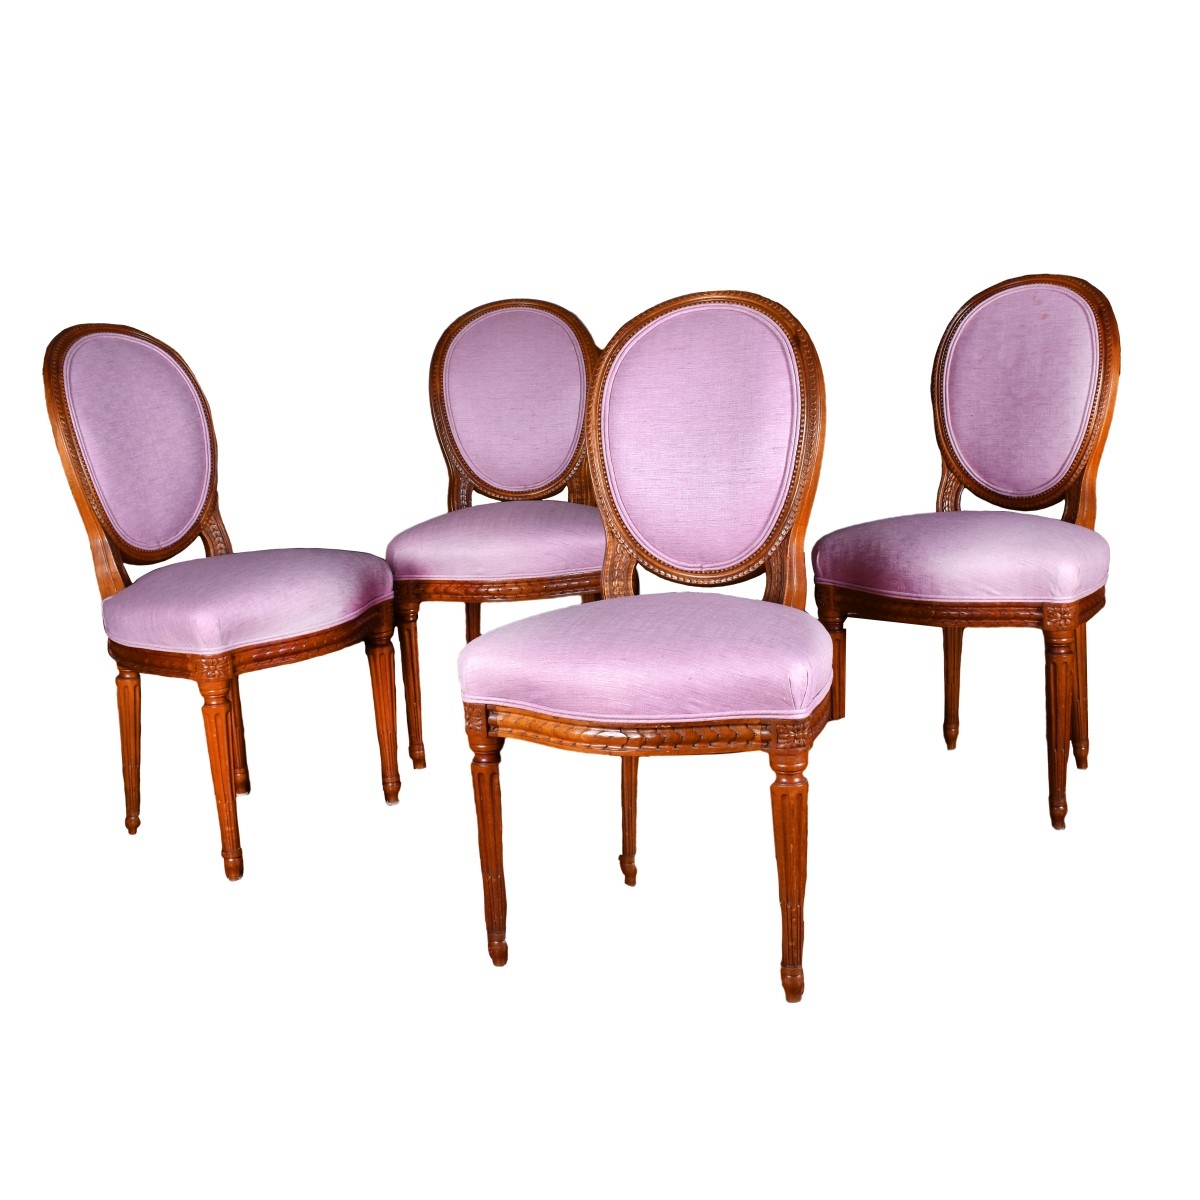 Four (4) French Louis XVI Style Side Chairs